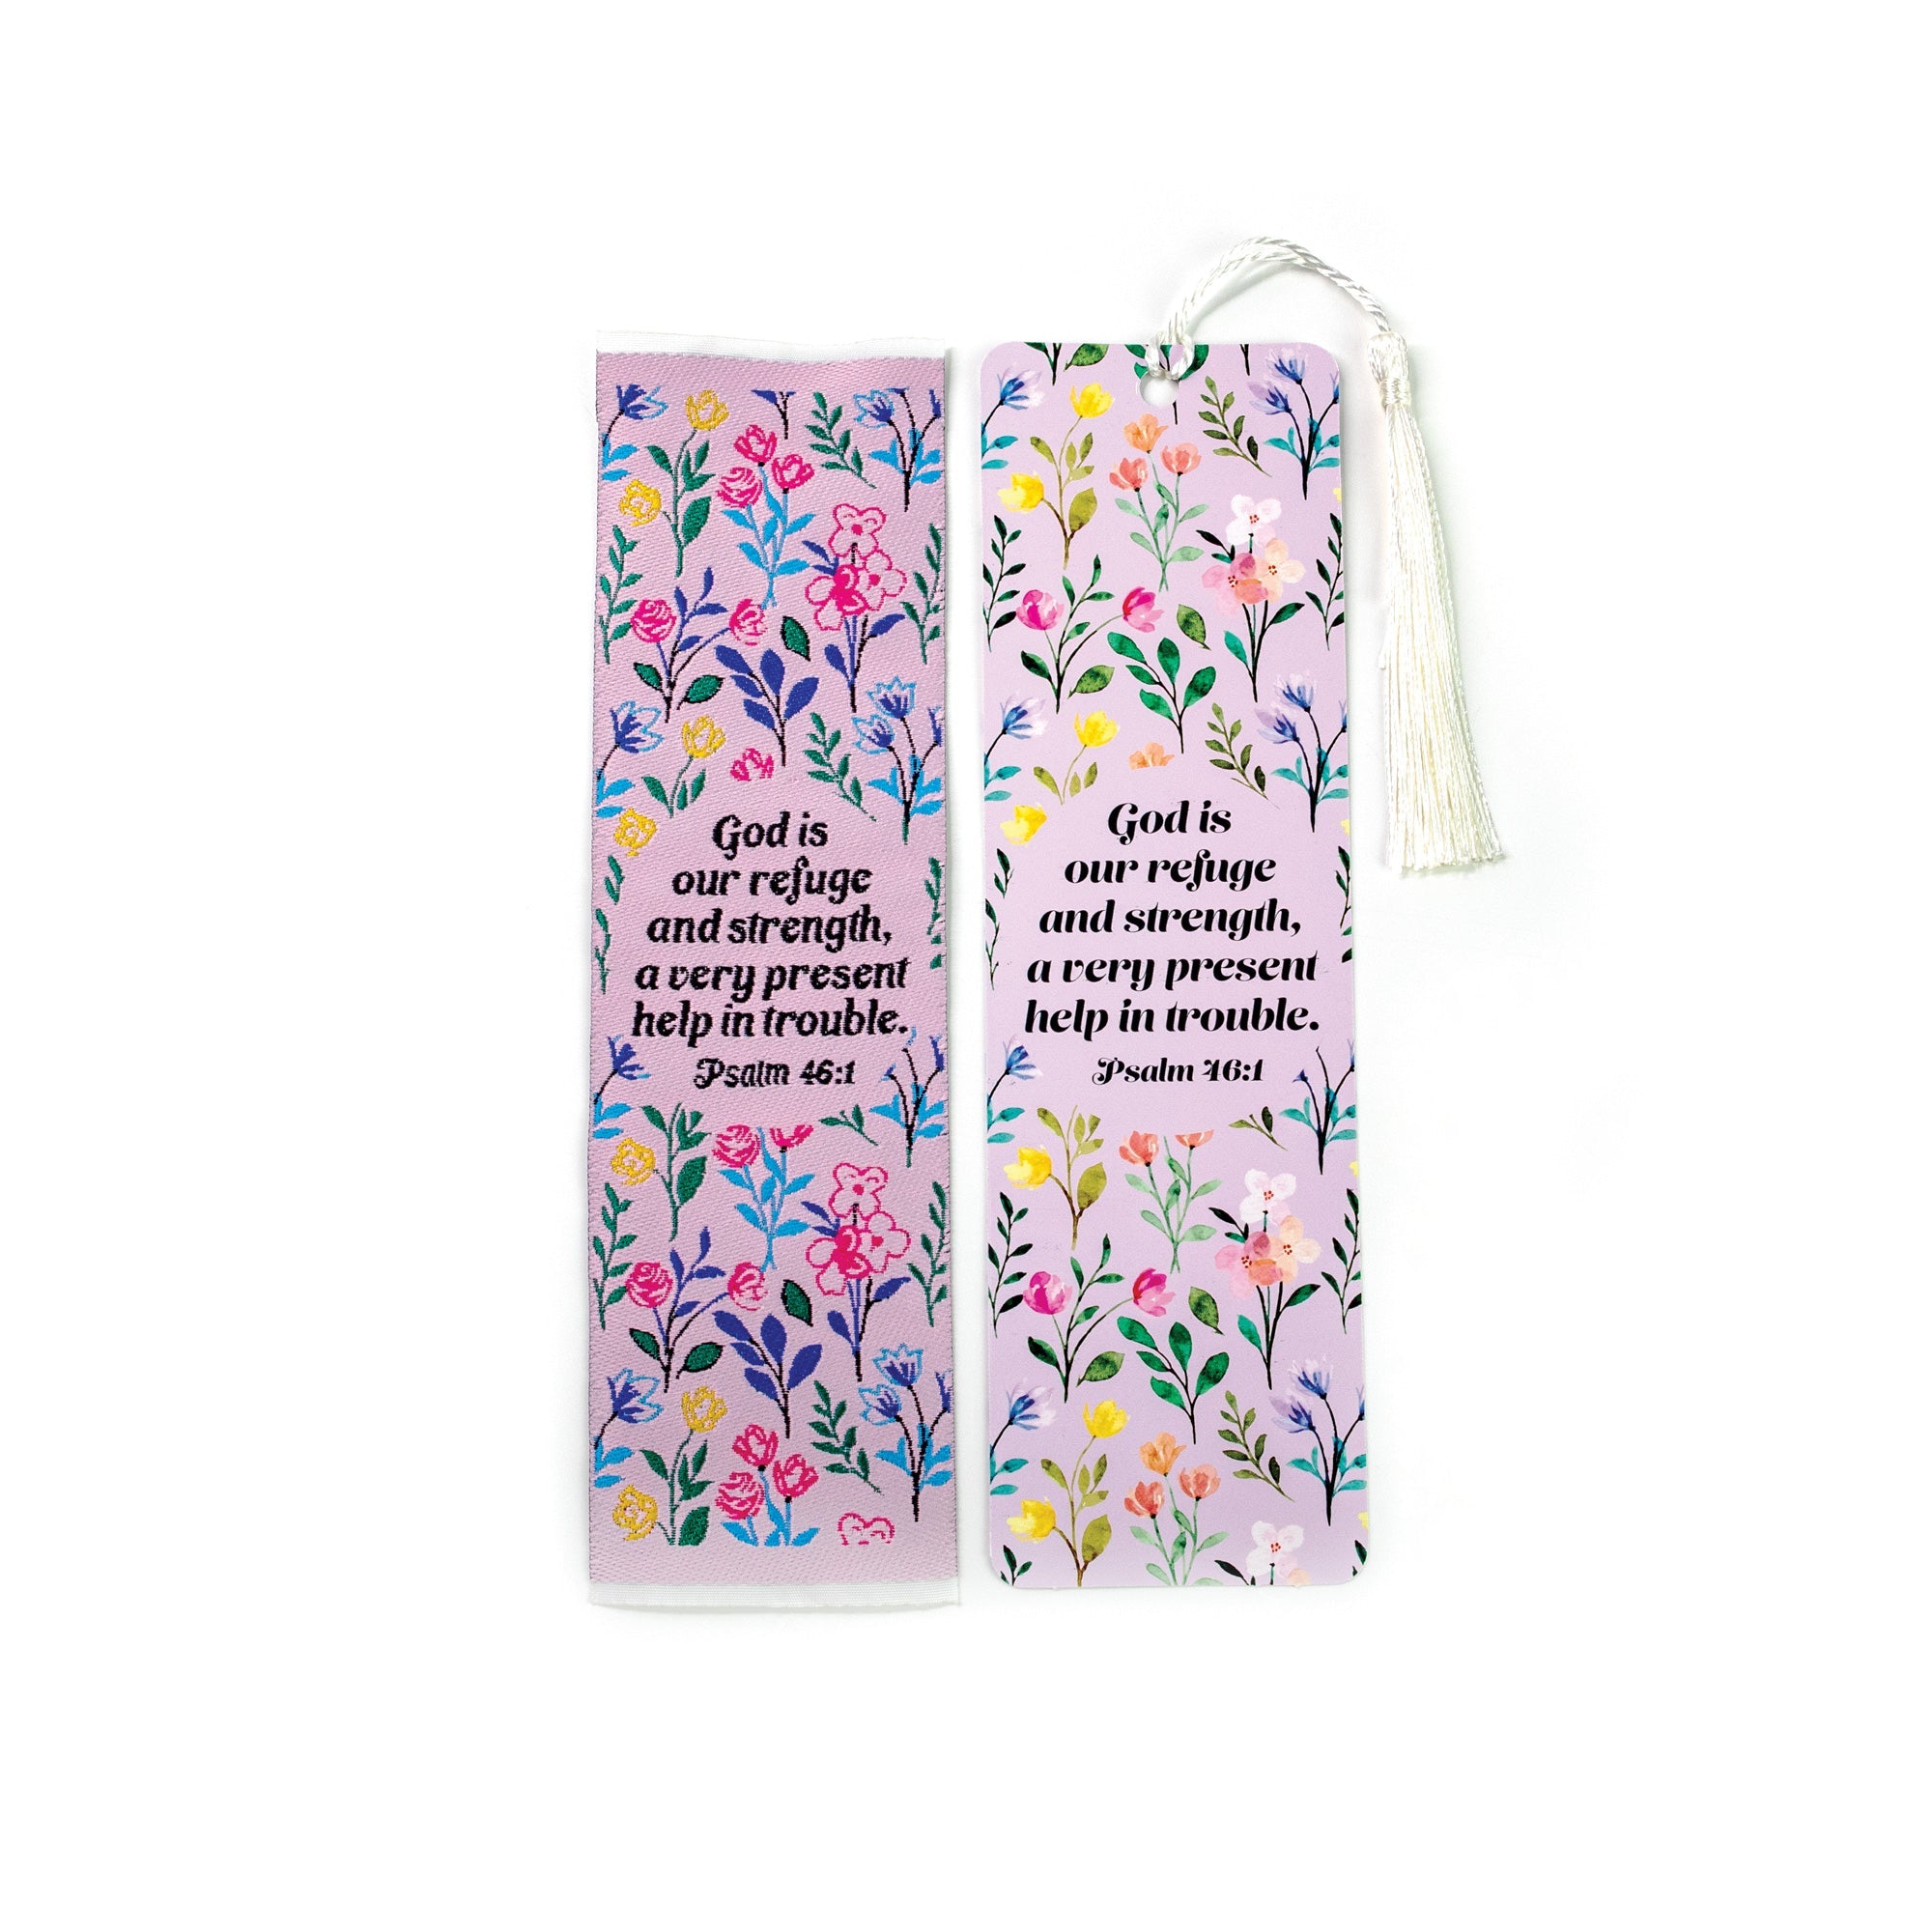 God is our refuge and strength - Psalm 46:1 Woven and Tasseled Bookmark Set